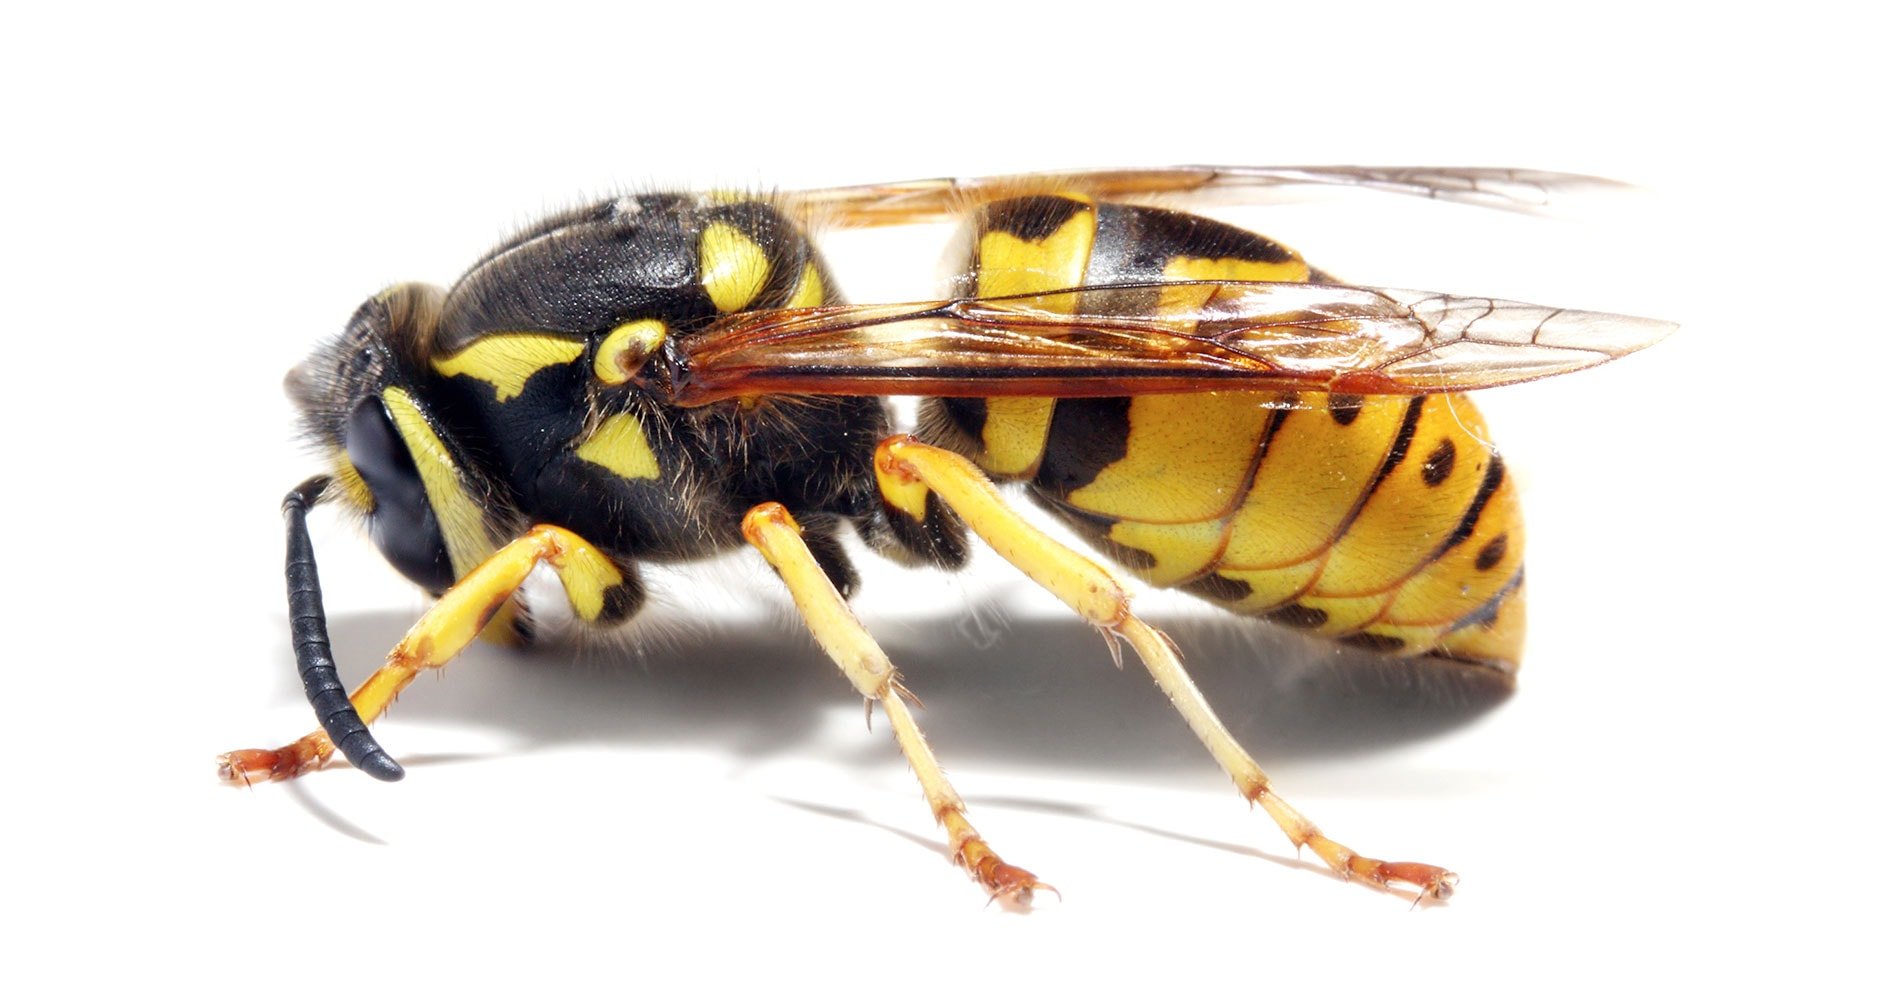 yellow jacket a threat to endangered bees